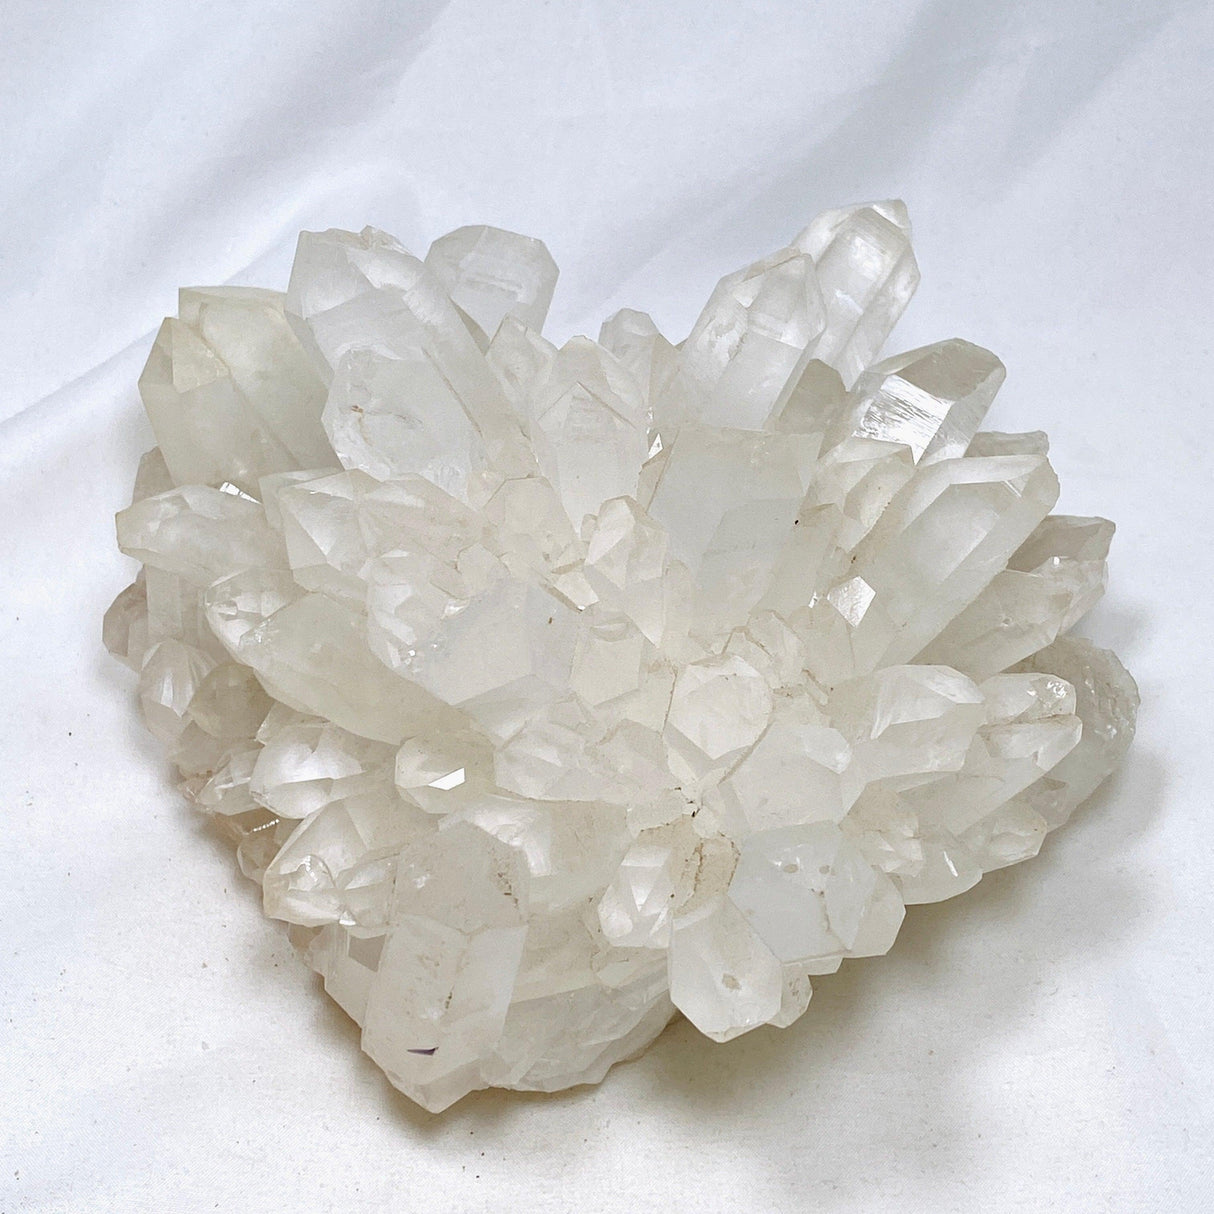 Clear Quartz Cluster with Wooden stand 3.4kg CQS-01 - Nature's Magick